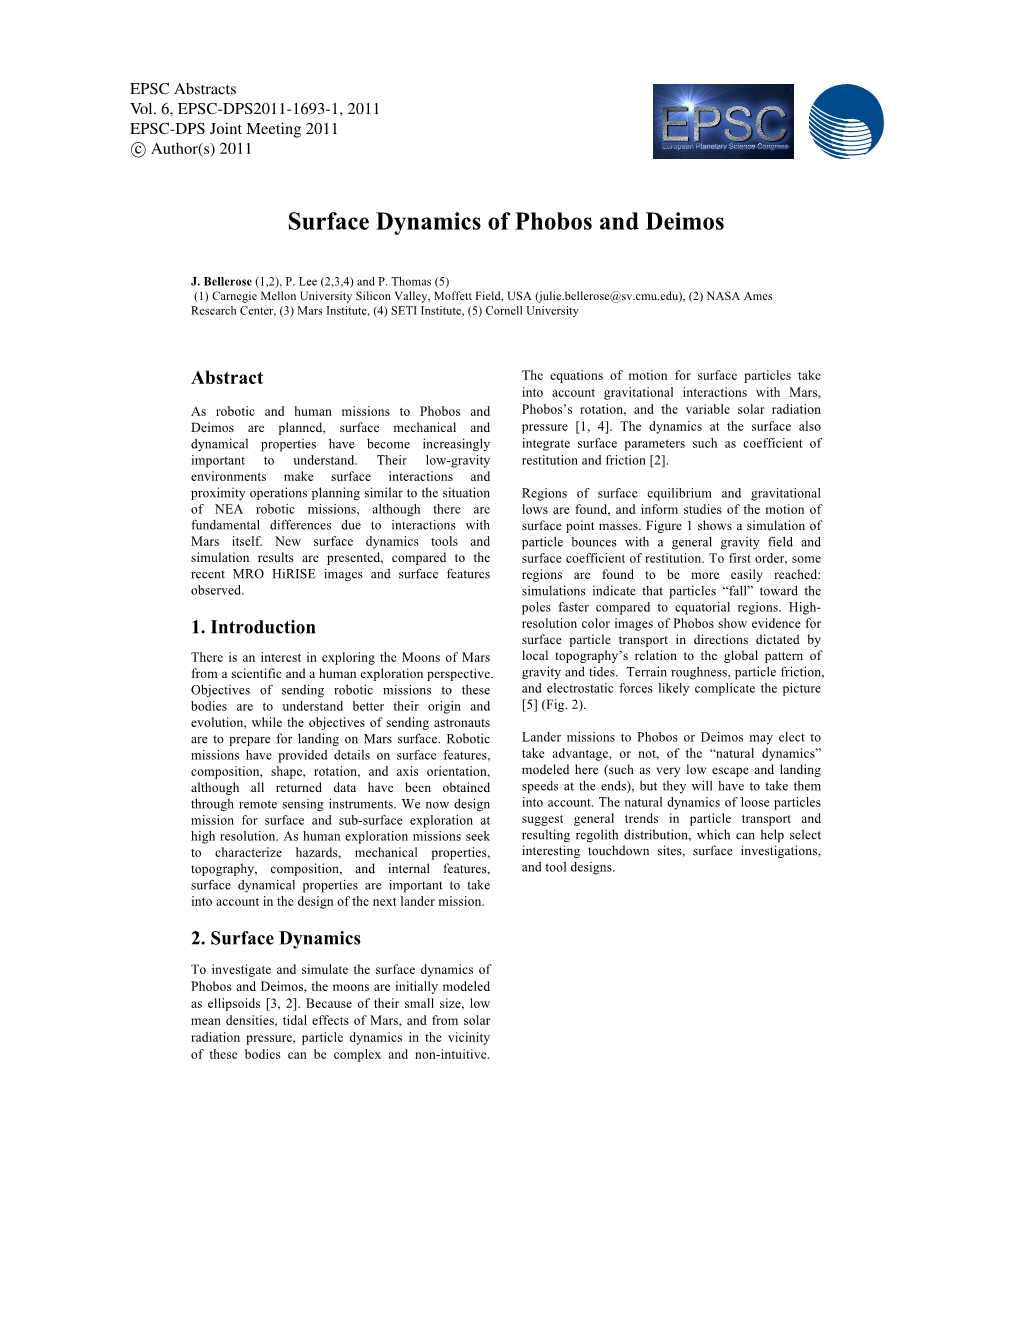 Surface Dynamics of Phobos and Deimos